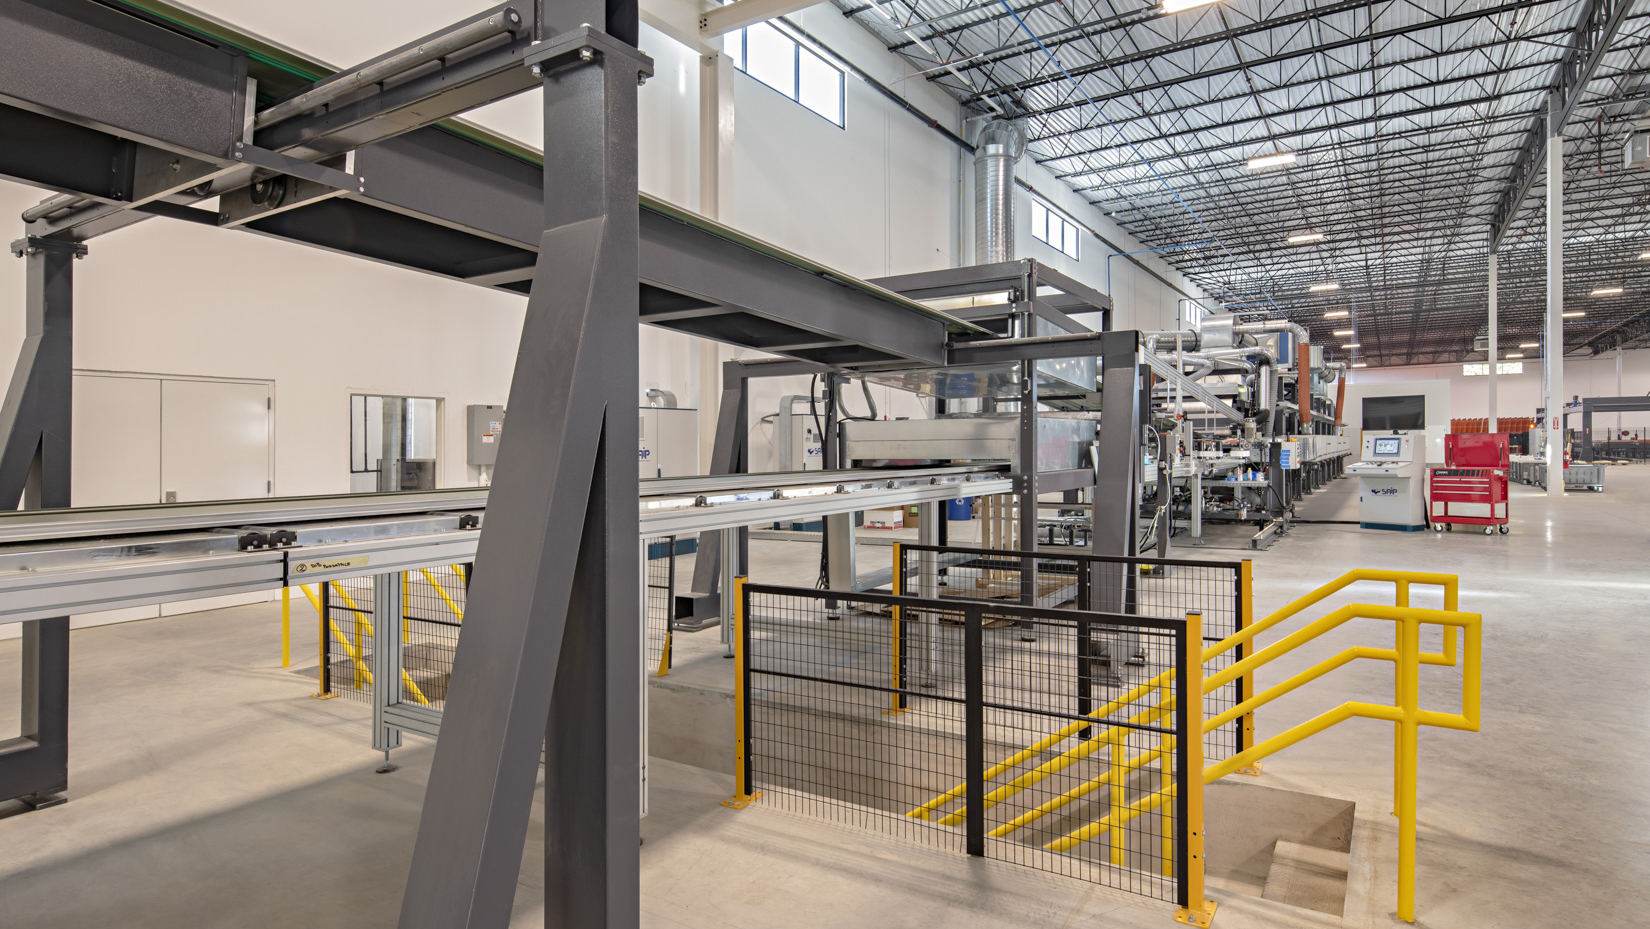 Smart design protects industrial facility occupants. At TrueCore’s South Carolina manufacturing facility, we designed circulation components, including stairs, for easier, safer and quicker access to different stretches of the production line.